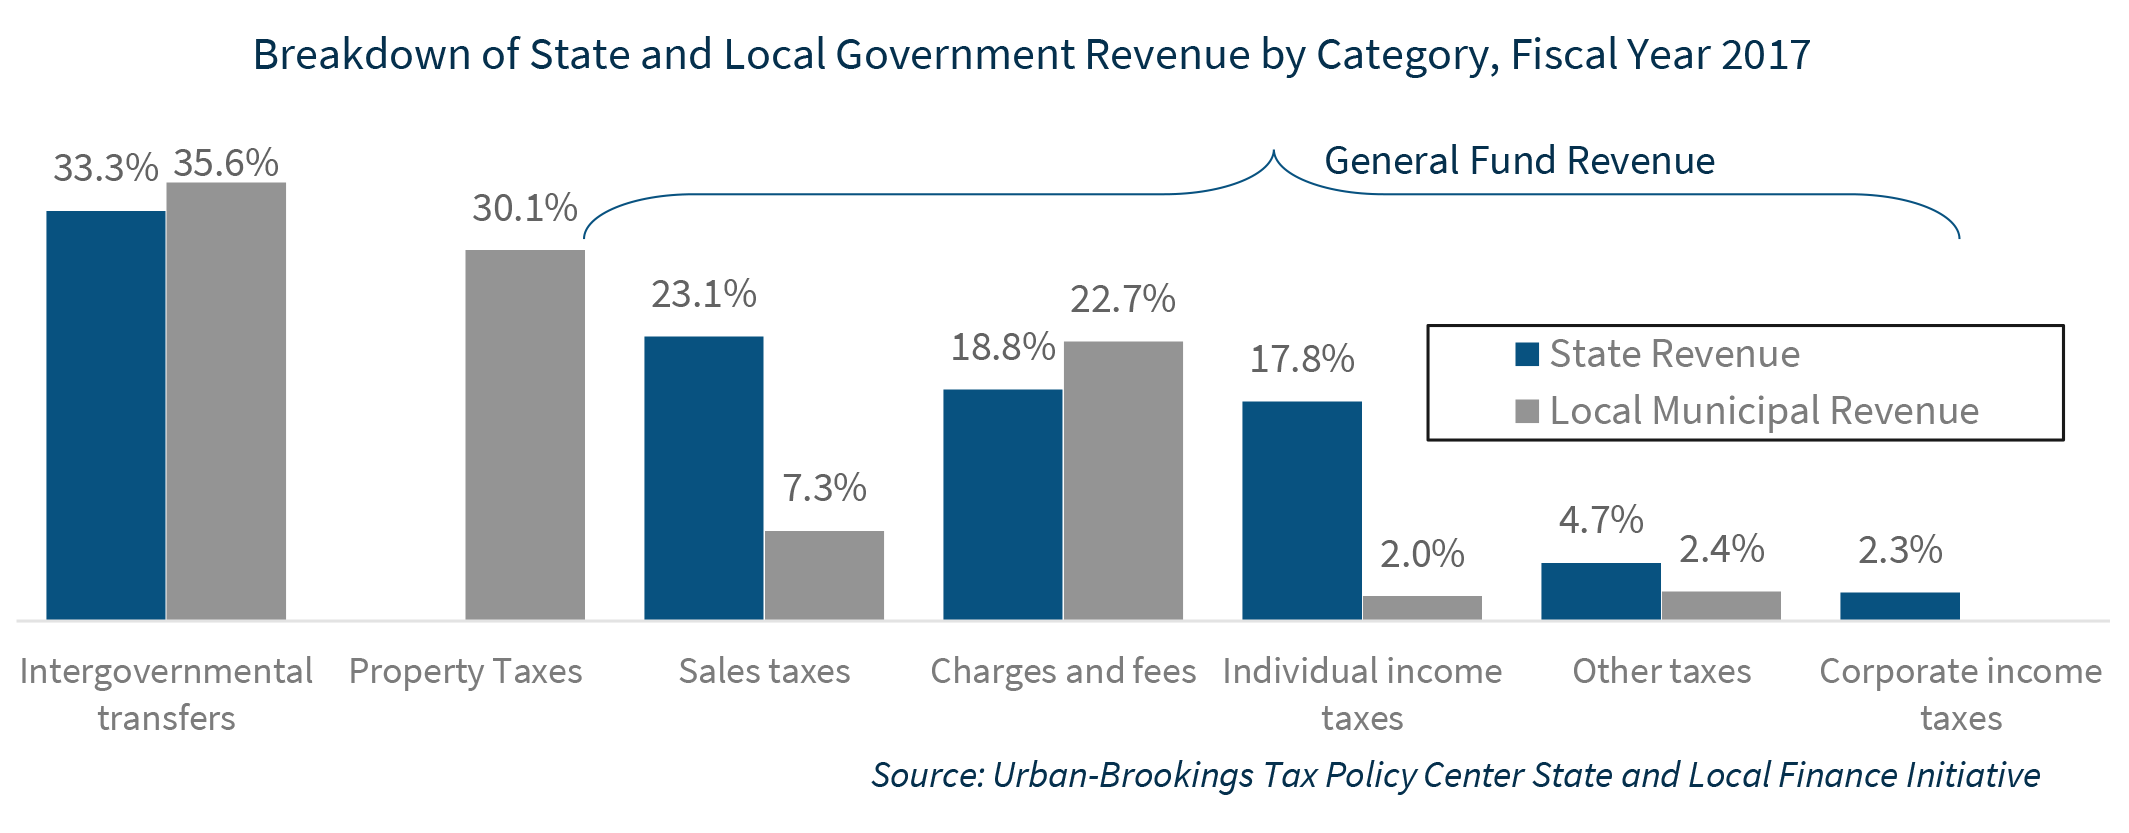 Breakdown of State and Local Government Revenue by Category, Fiscal Year 2017